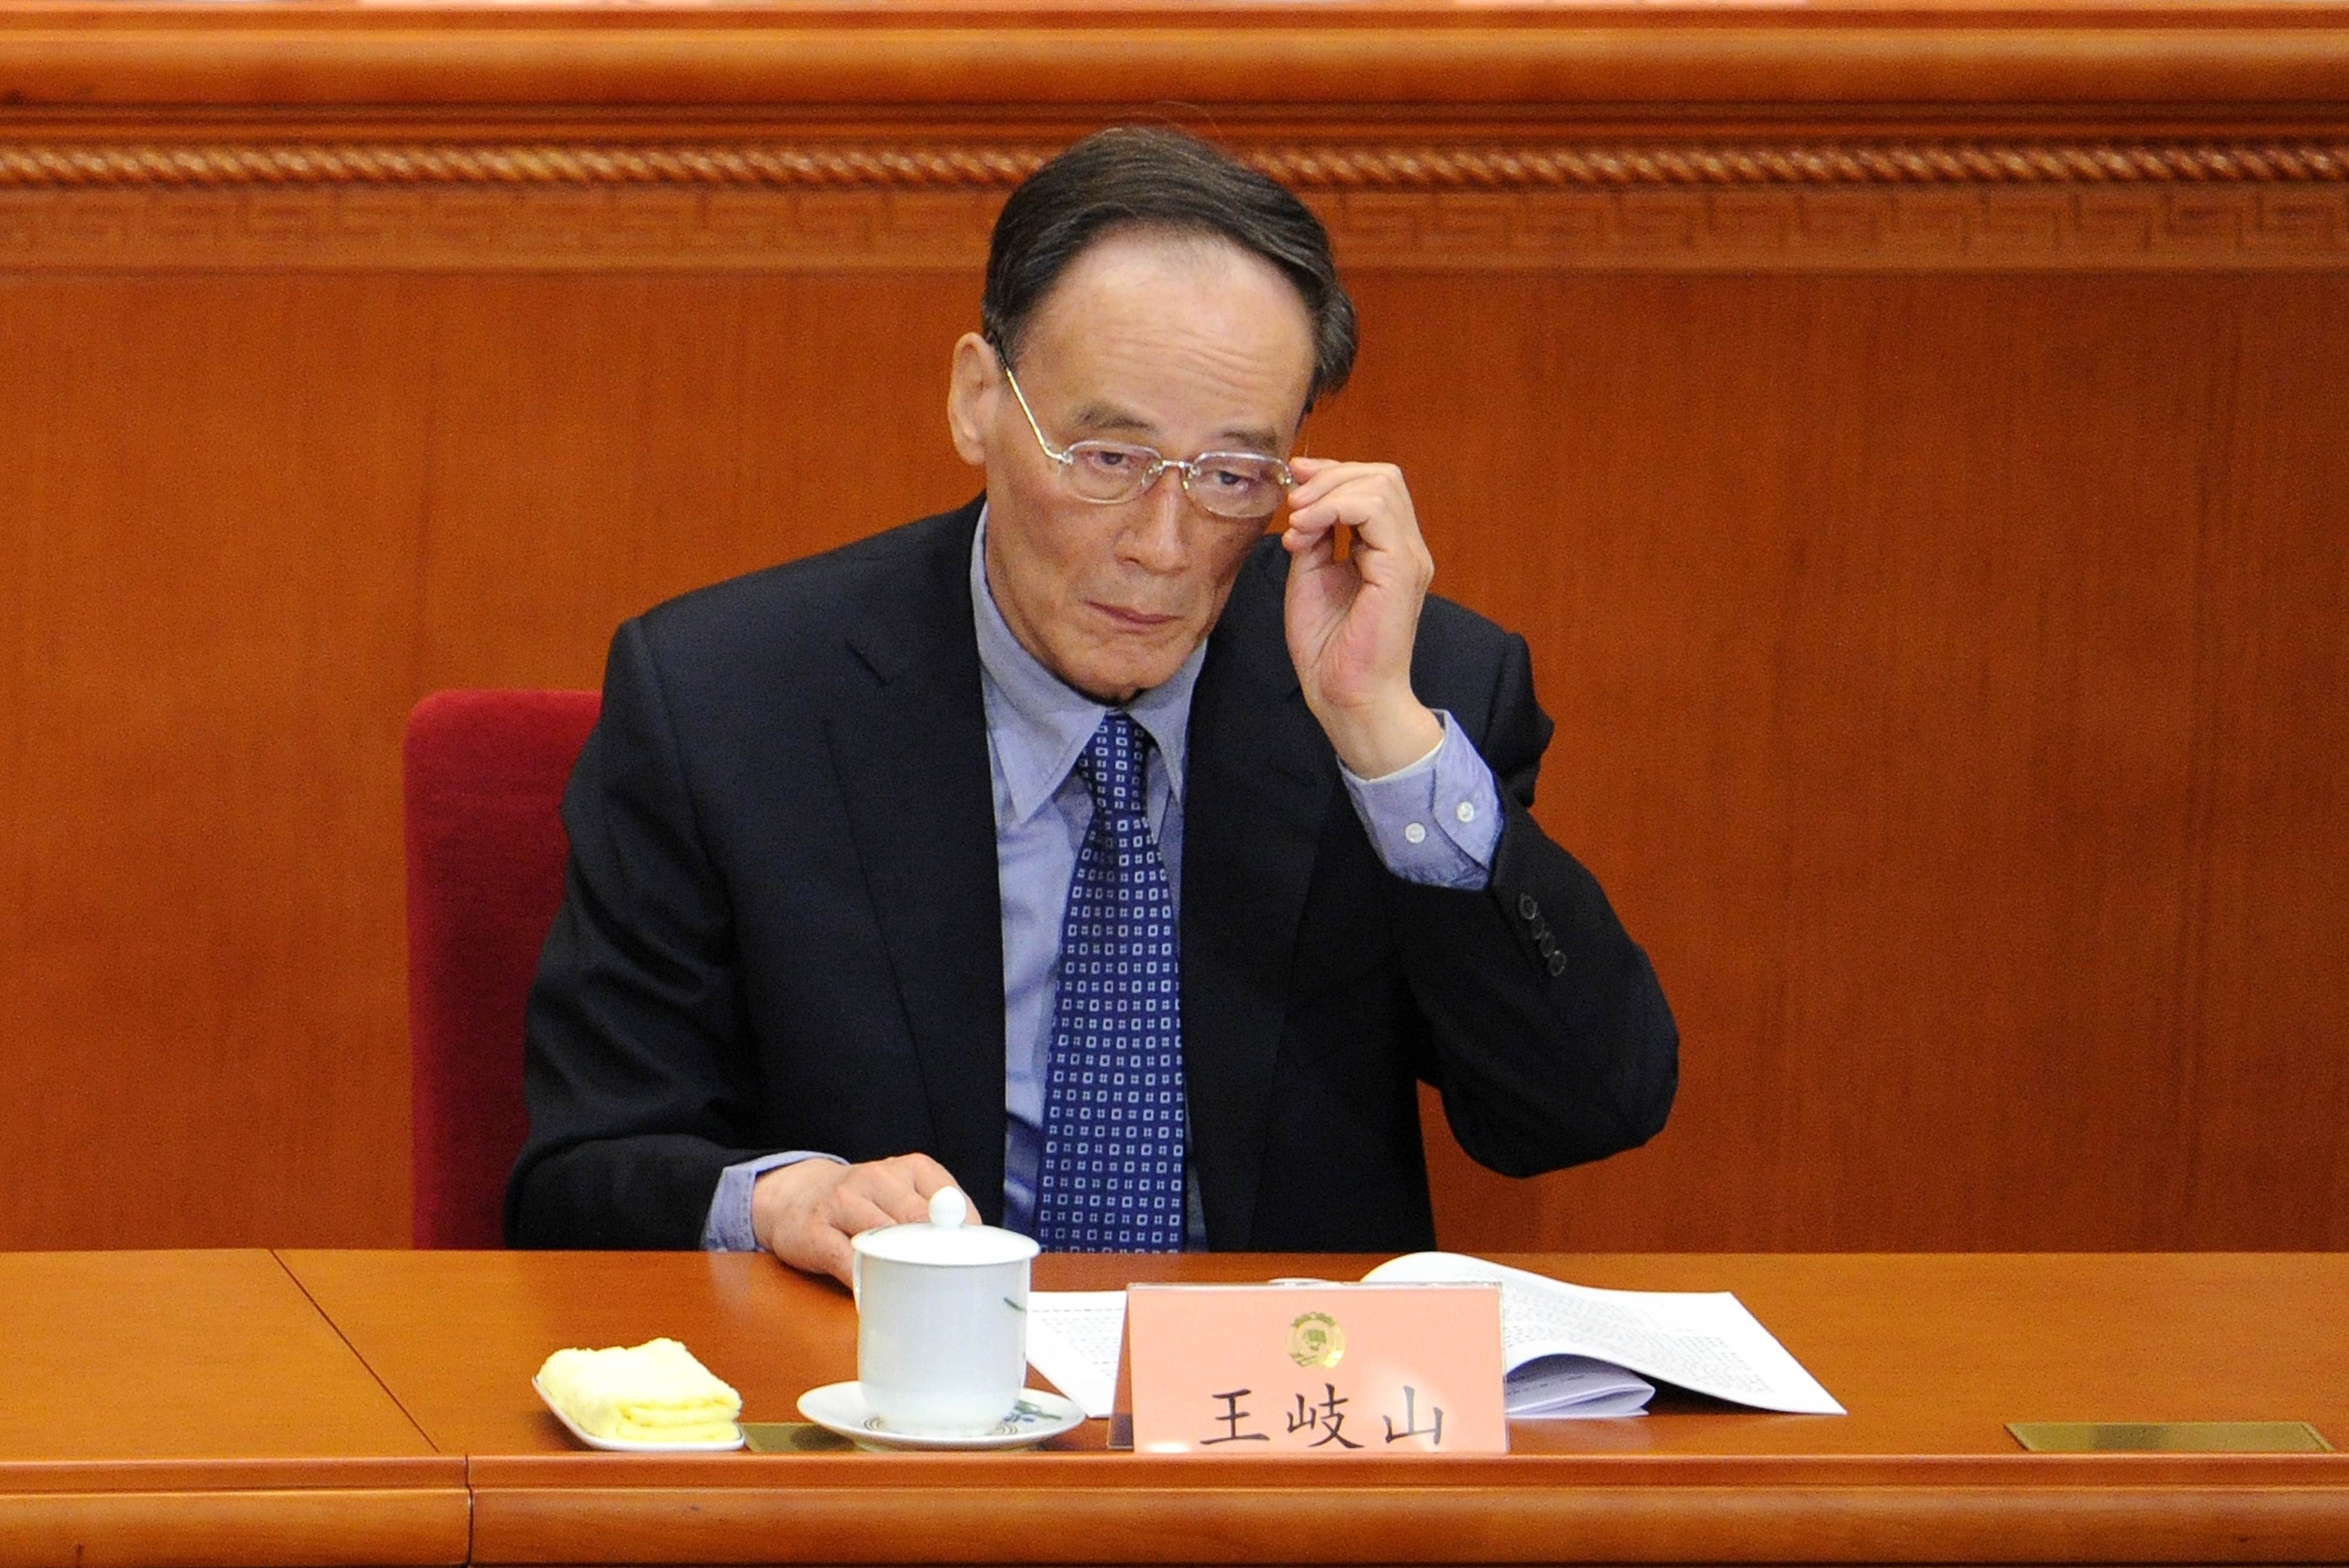 Wang Qishan, secretary of China's Central Commission for Discipline Inspection, which said in one week it had dealt with more than 150 cases involving officials violating Communist Party disciplinary rules. Photo: AFP